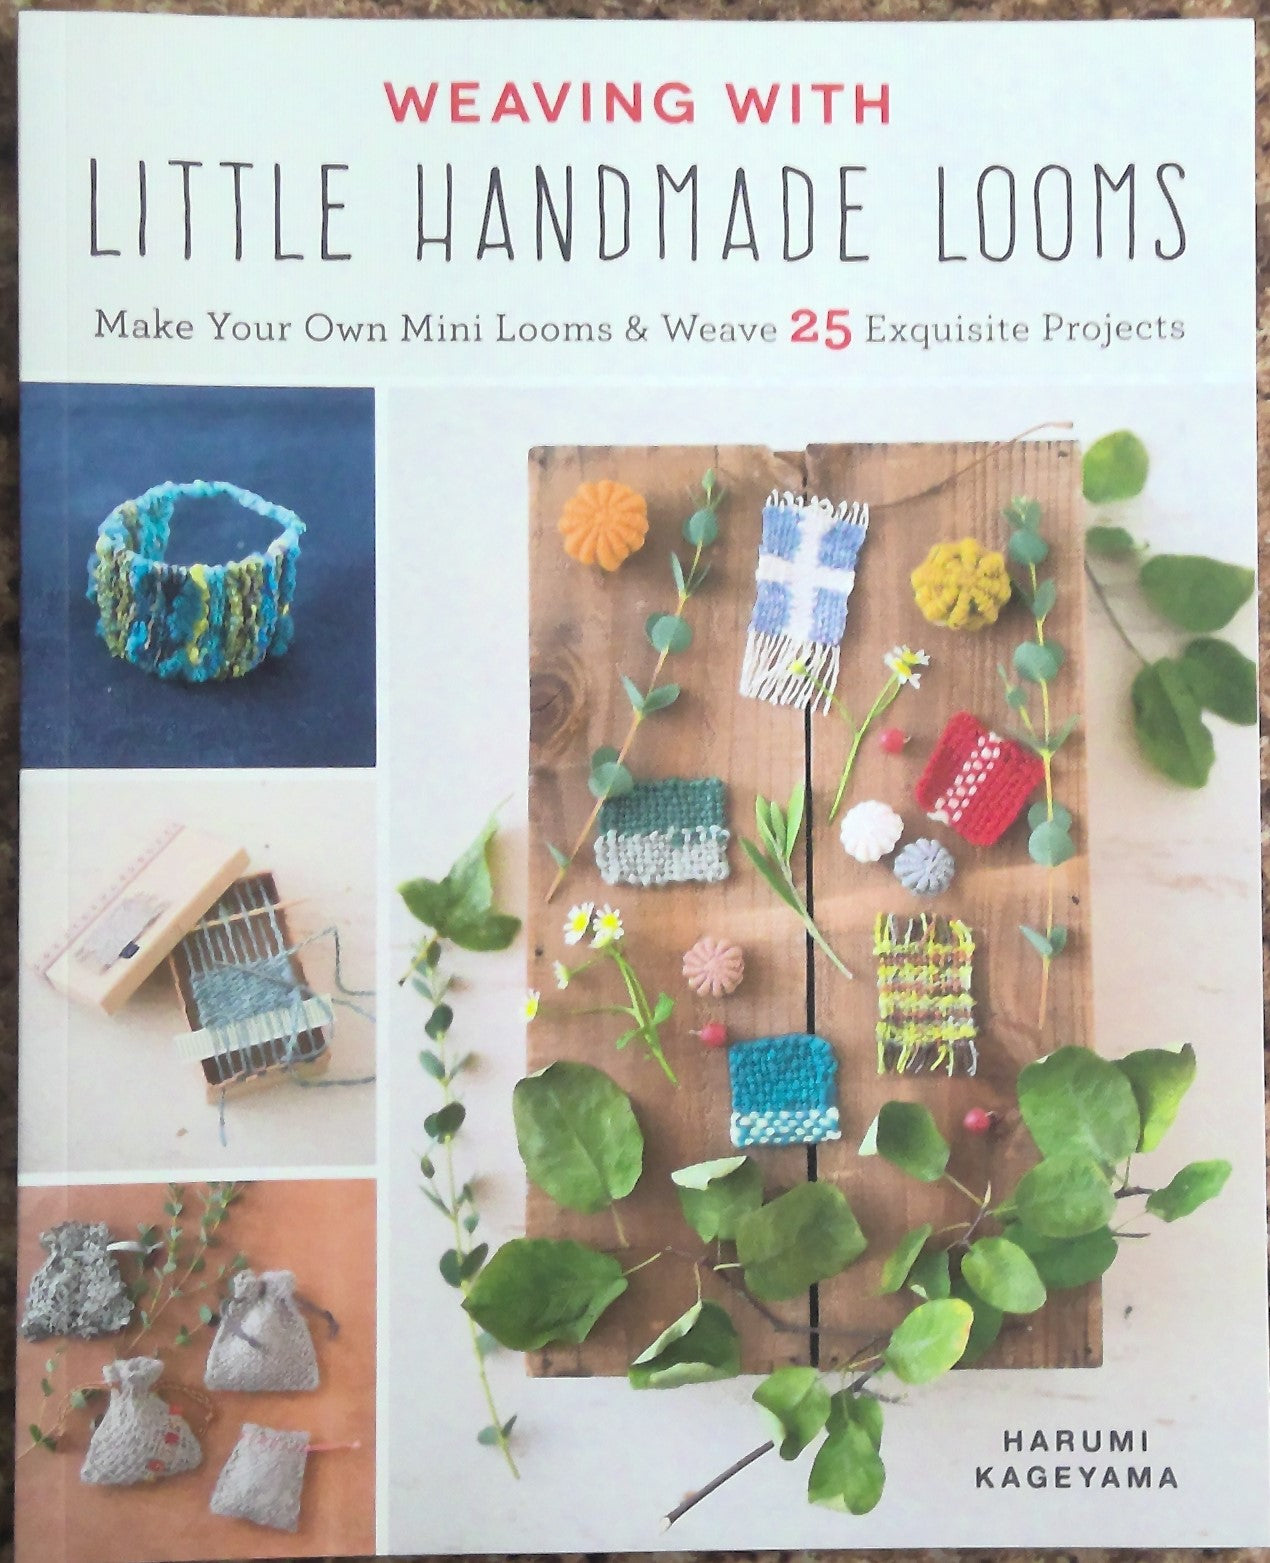 Weaving with Little Handmade Looms